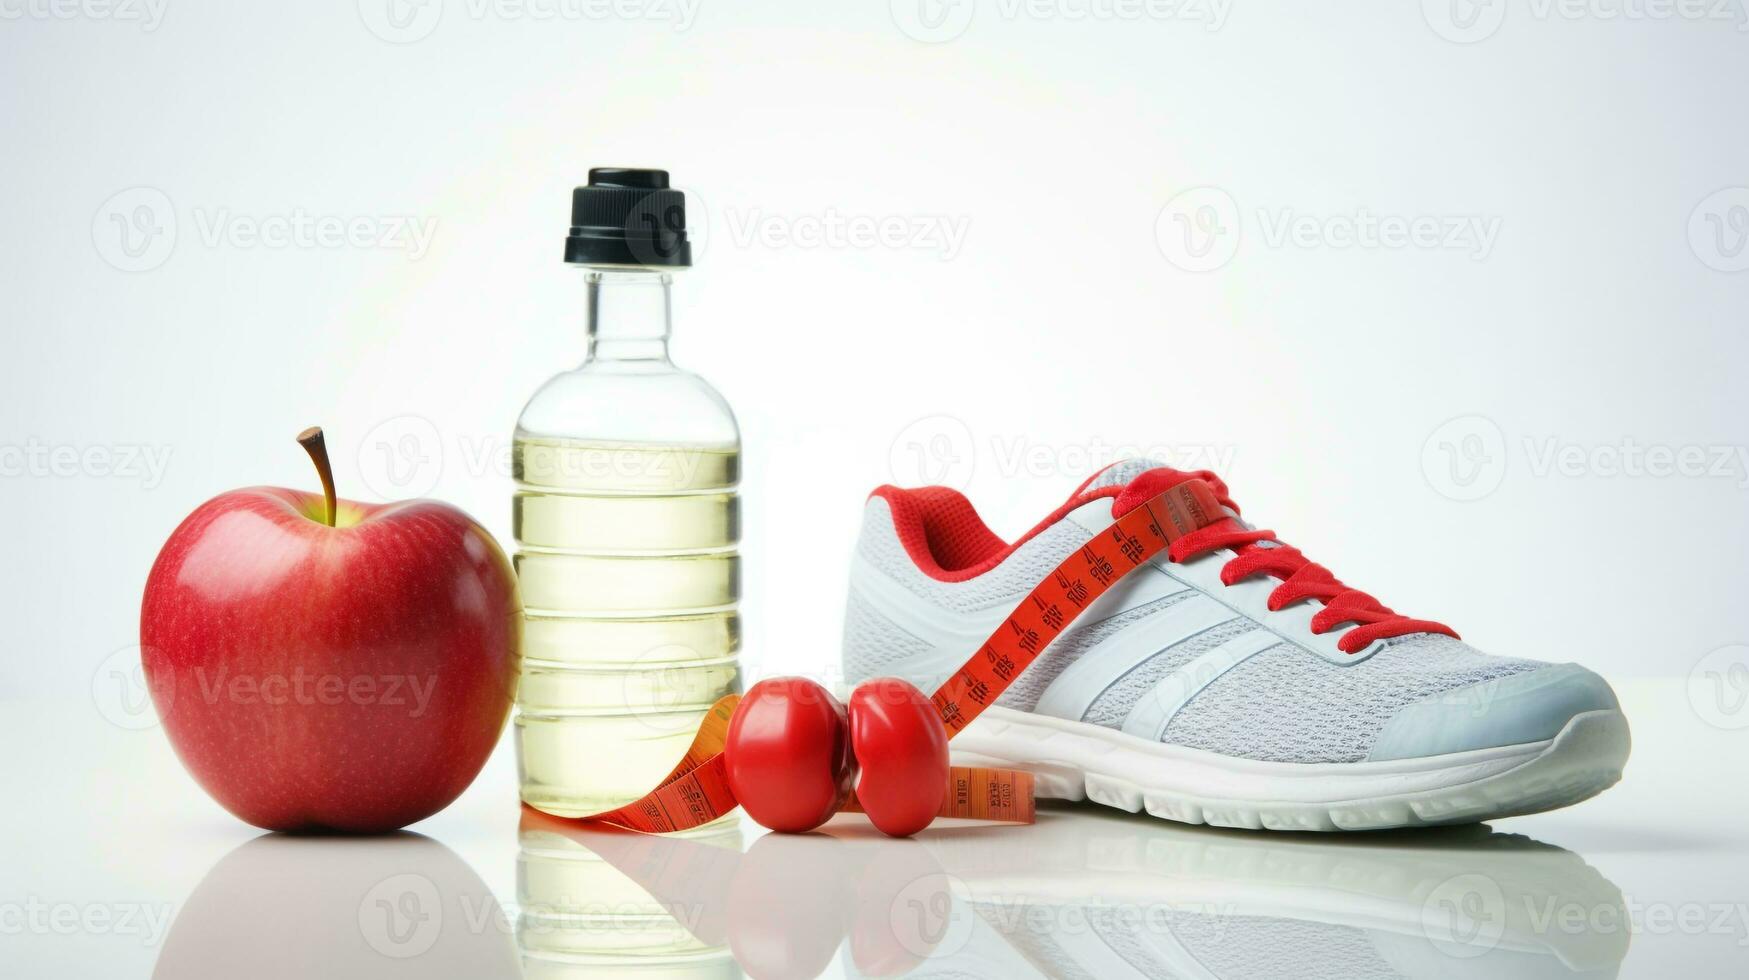 Conceptual health and lifestyle image with running shoes, water bottle, and a heart-shaped measuring tape symbol AI Generative photo